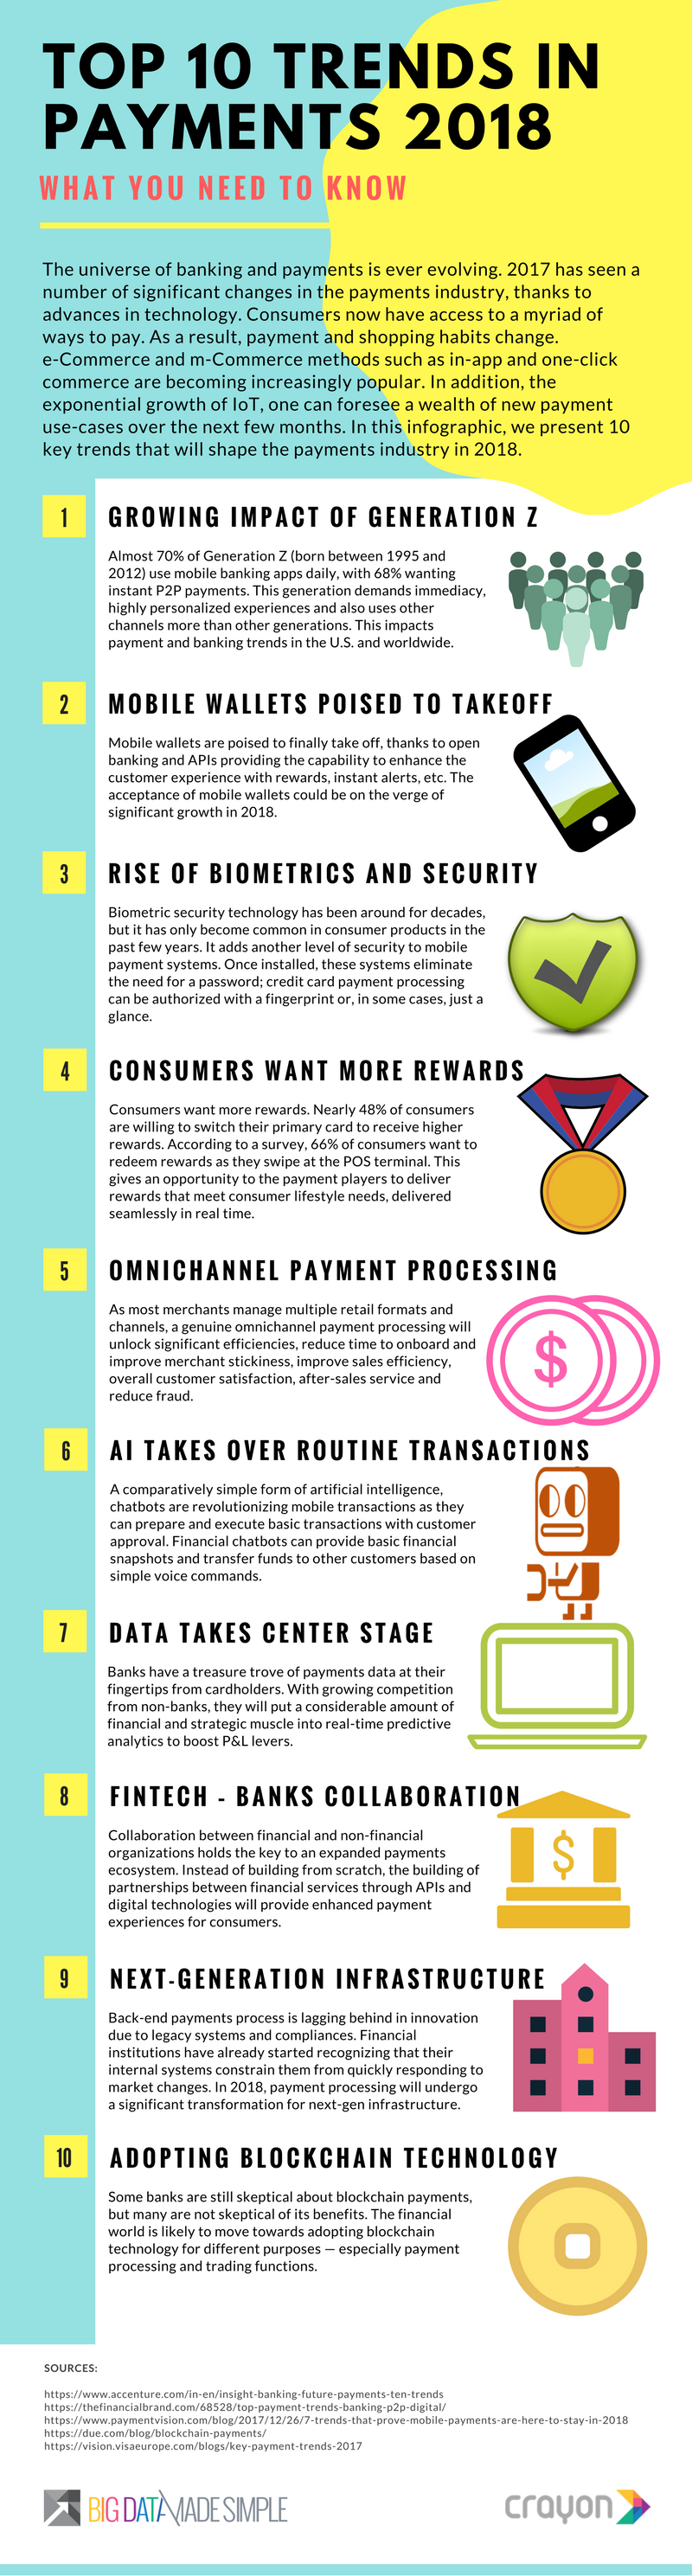 Top 10 trends in payments 2018